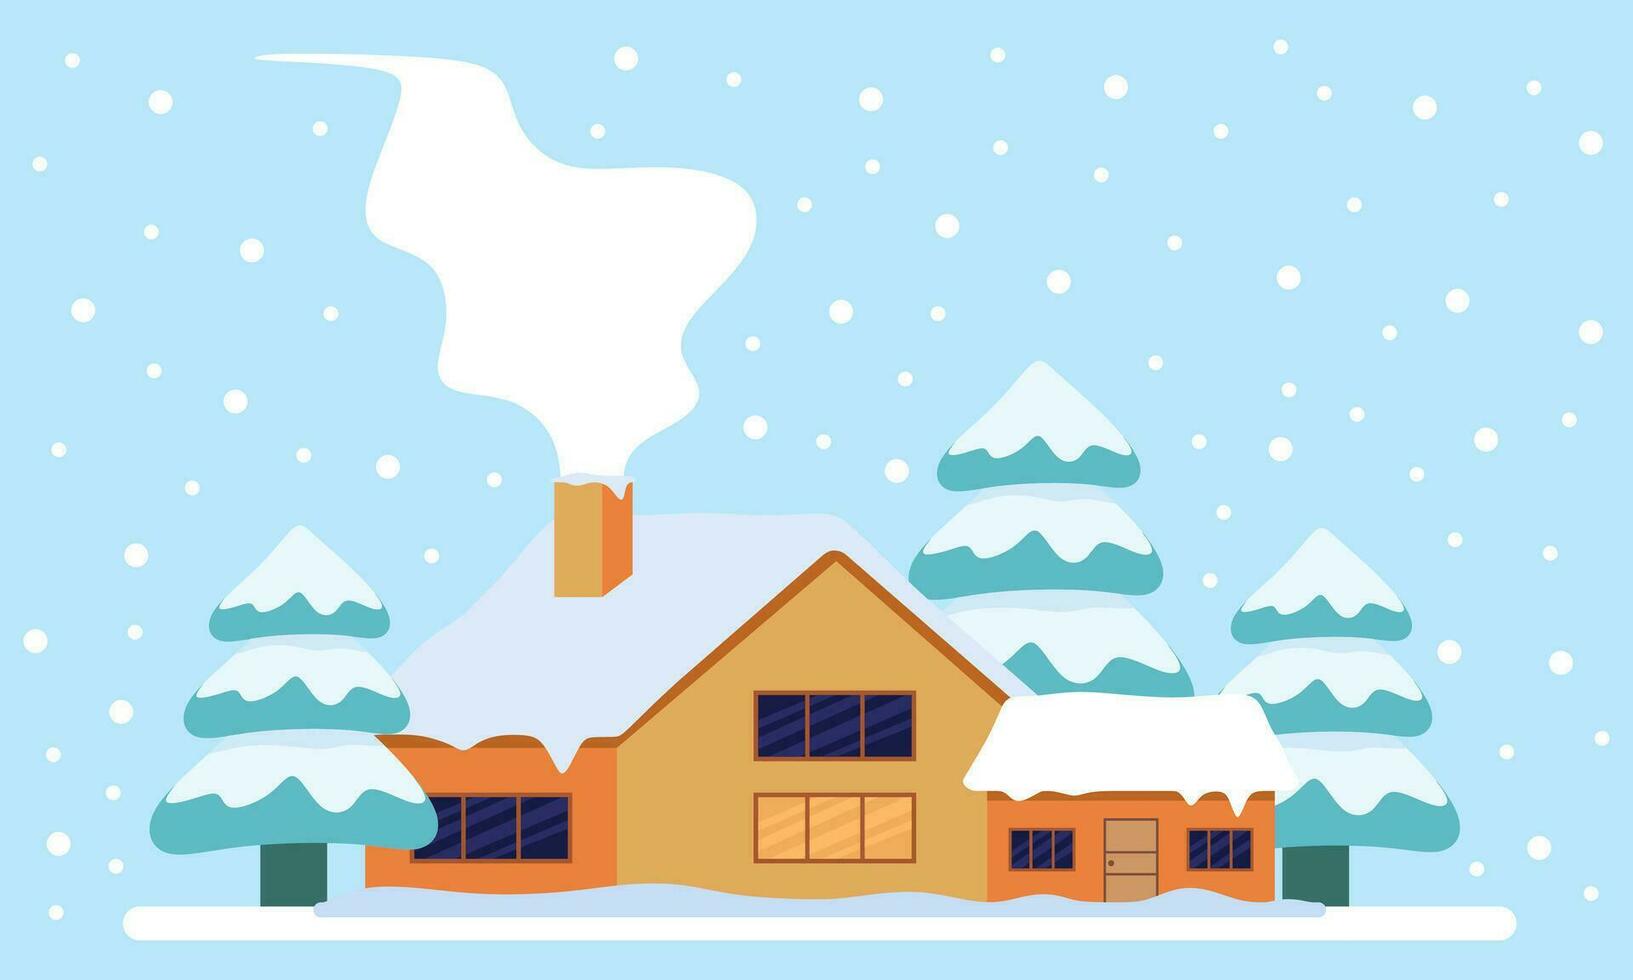 Cute winter landscape. Winter banner. Lovely houses in a snowy valley. Horizontal landscape. Winter Cabin Illustration vector